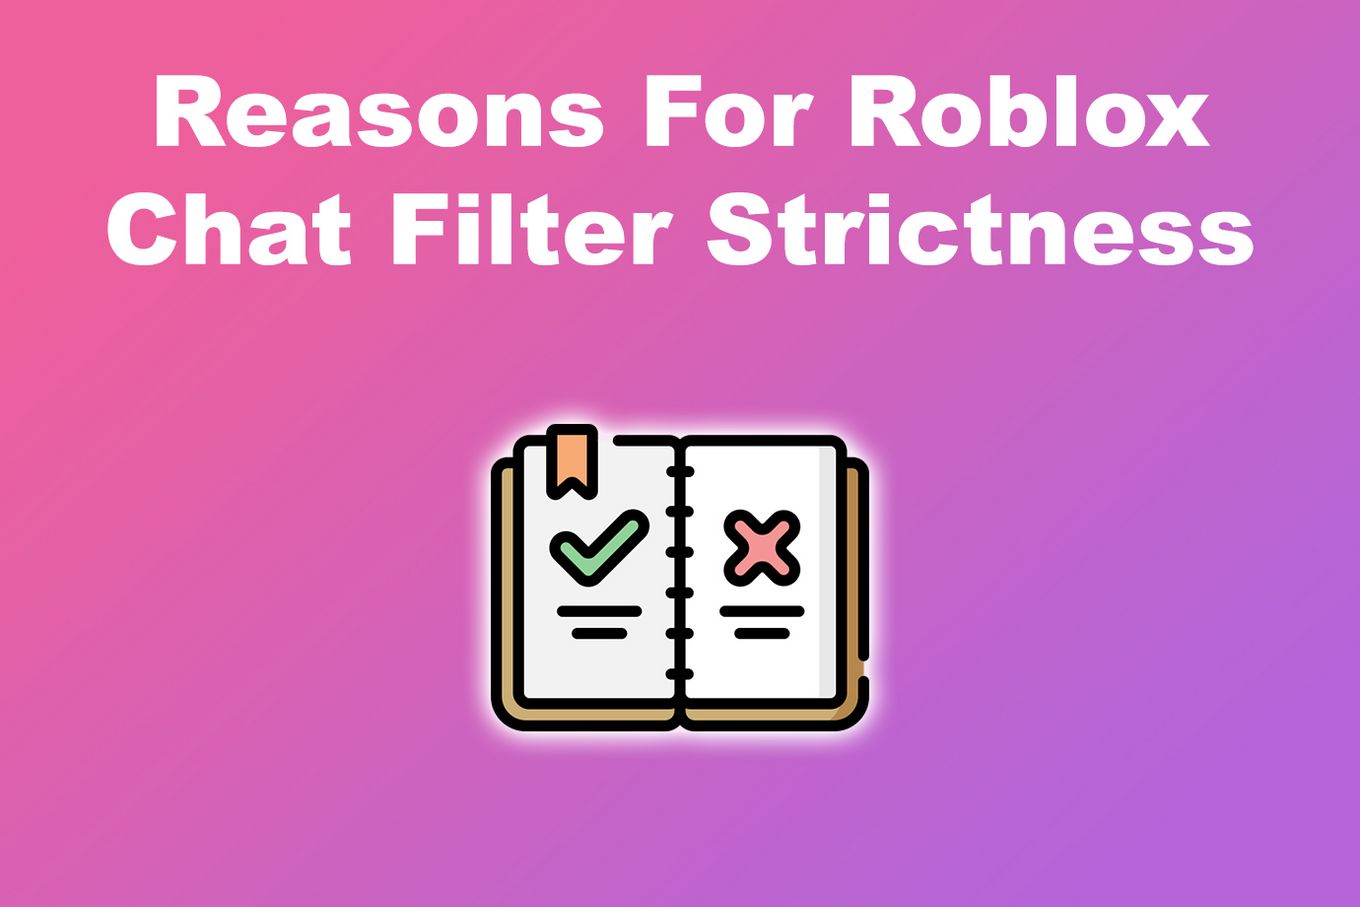 Petition · Make the Roblox Chat Filter less strict. (Petition) ·